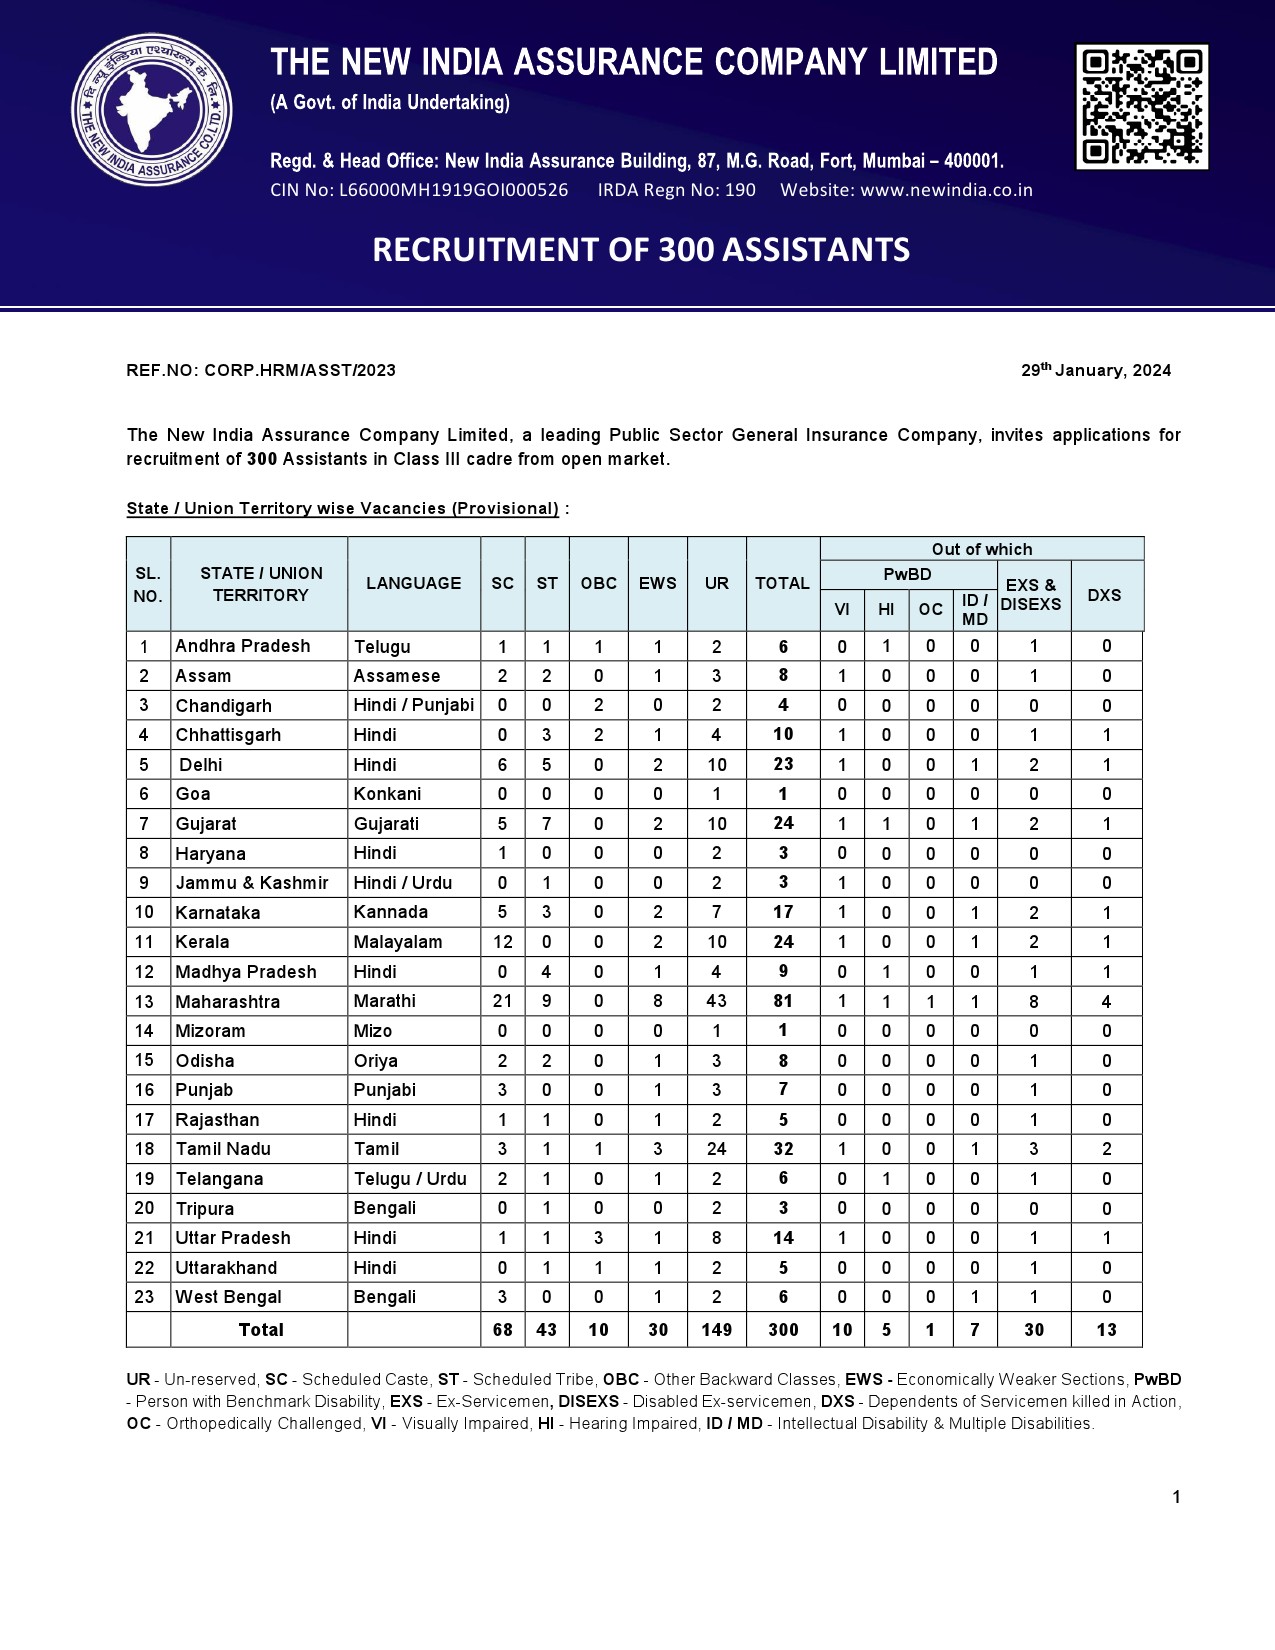 Class III Assistants in New India Assurance Company - Notification Image 1